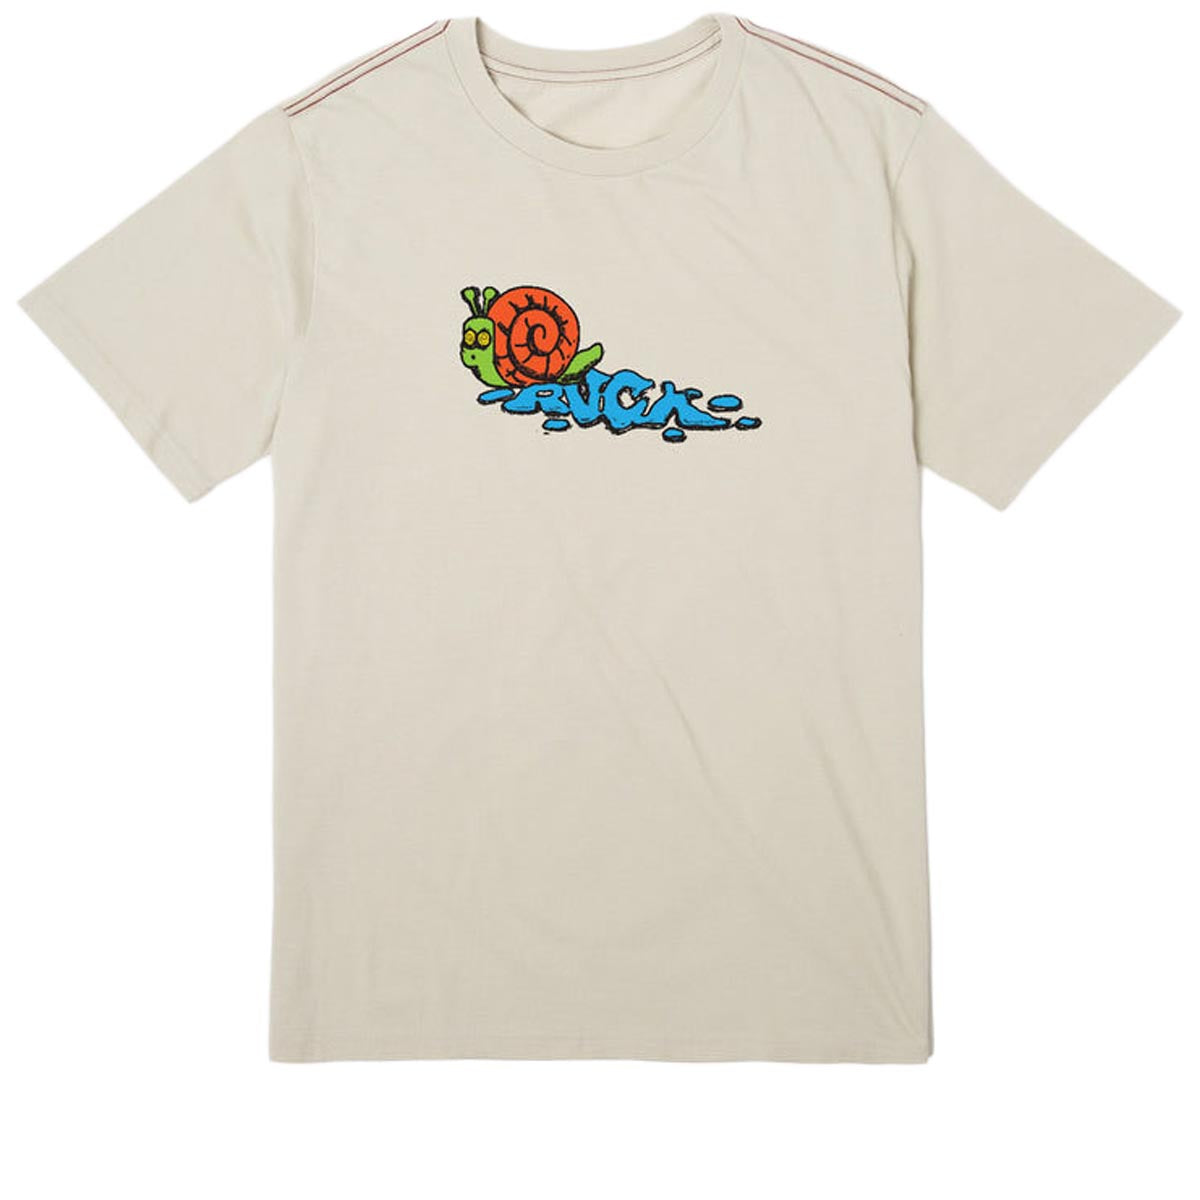 RVCA Slow Roll T-Shirt - Mirage image 1